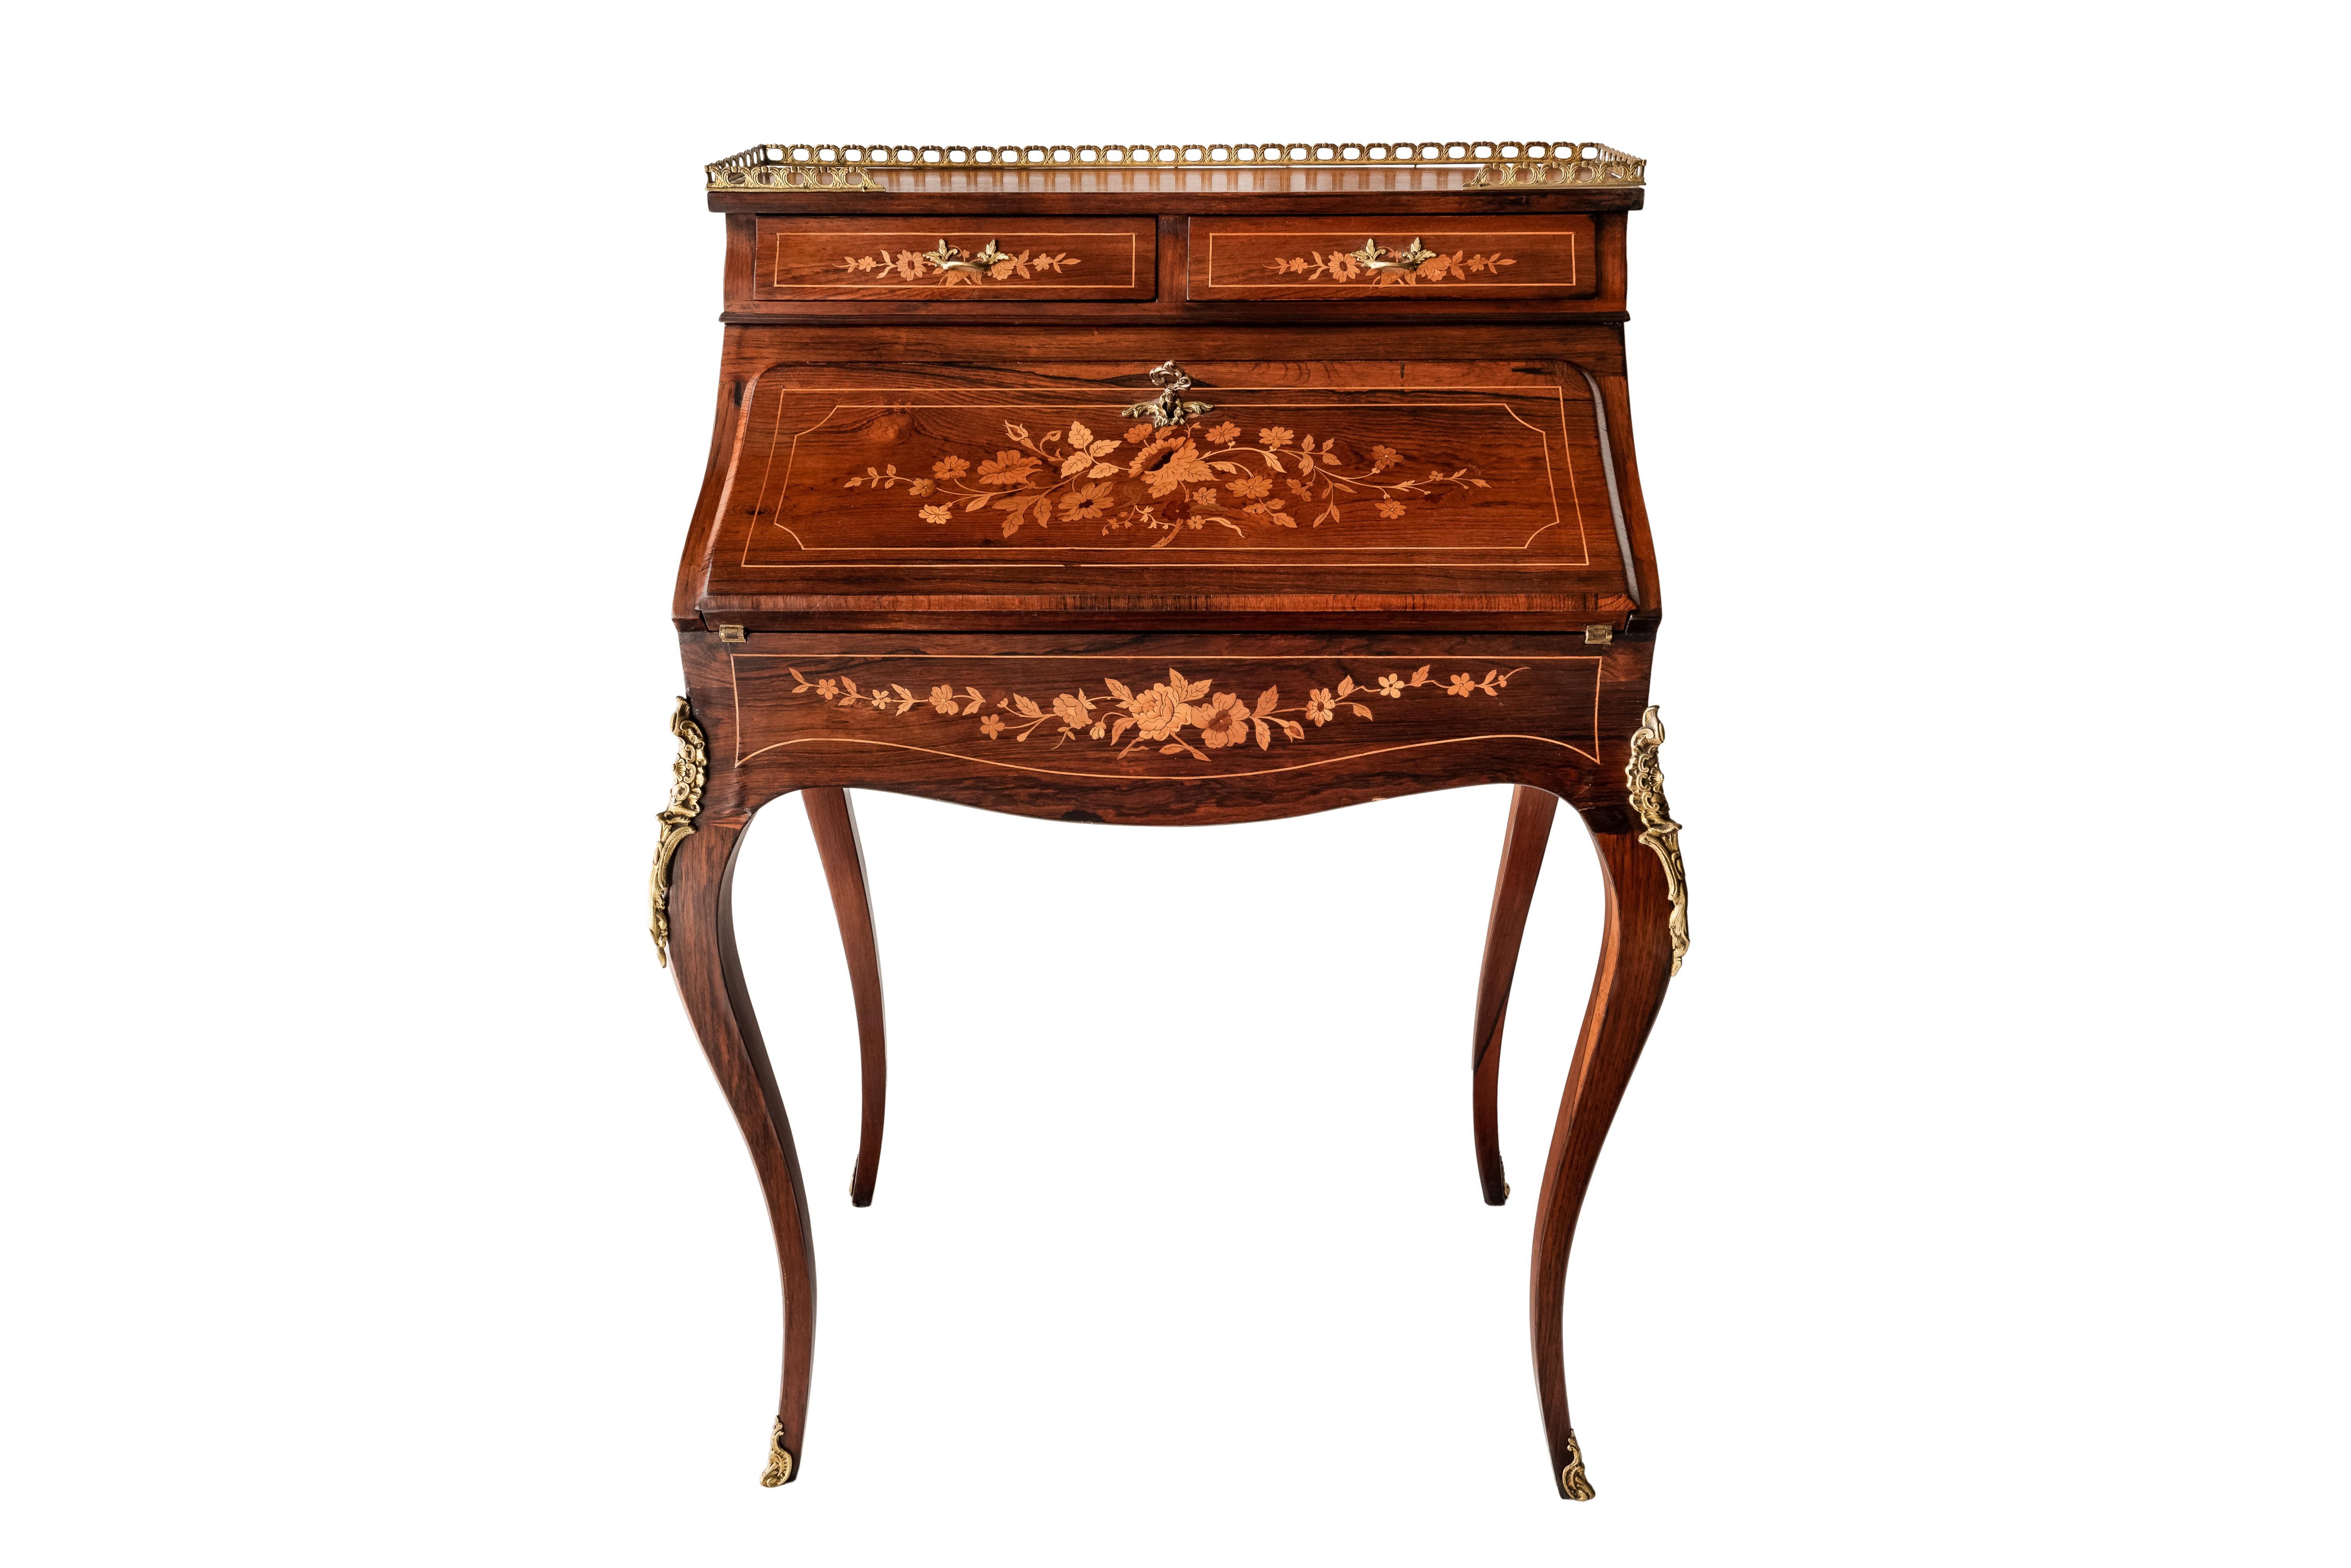 19th Century Rosewood French Louis XV Style Marquetry Bureau Desk with Secret In Good Condition For Sale In Matosinhos, PT